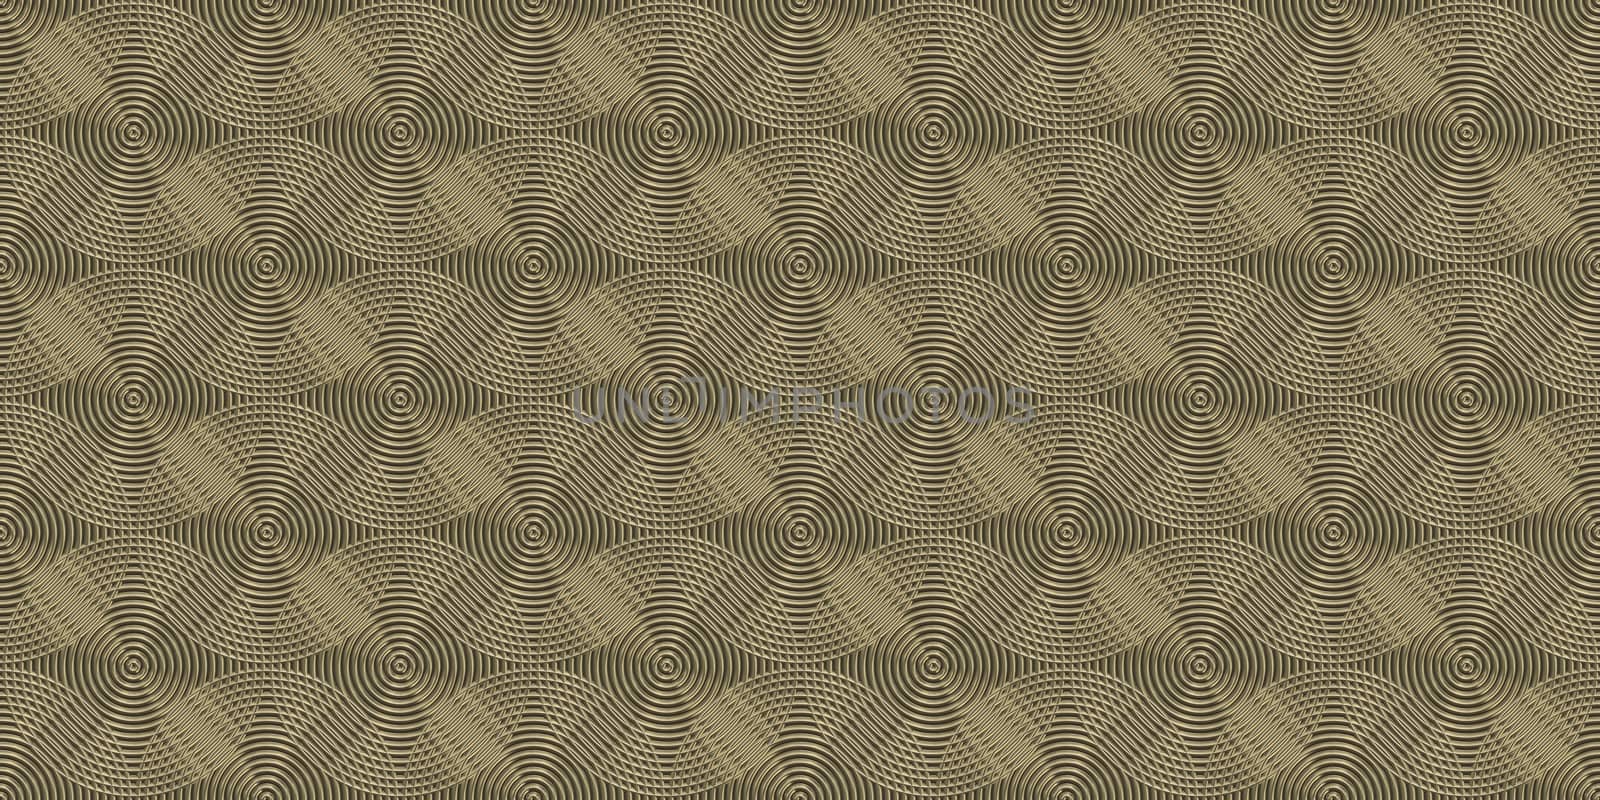 Metal circles pattern. Bronze art deco seamless texture. Vintage rings background. by sanches812